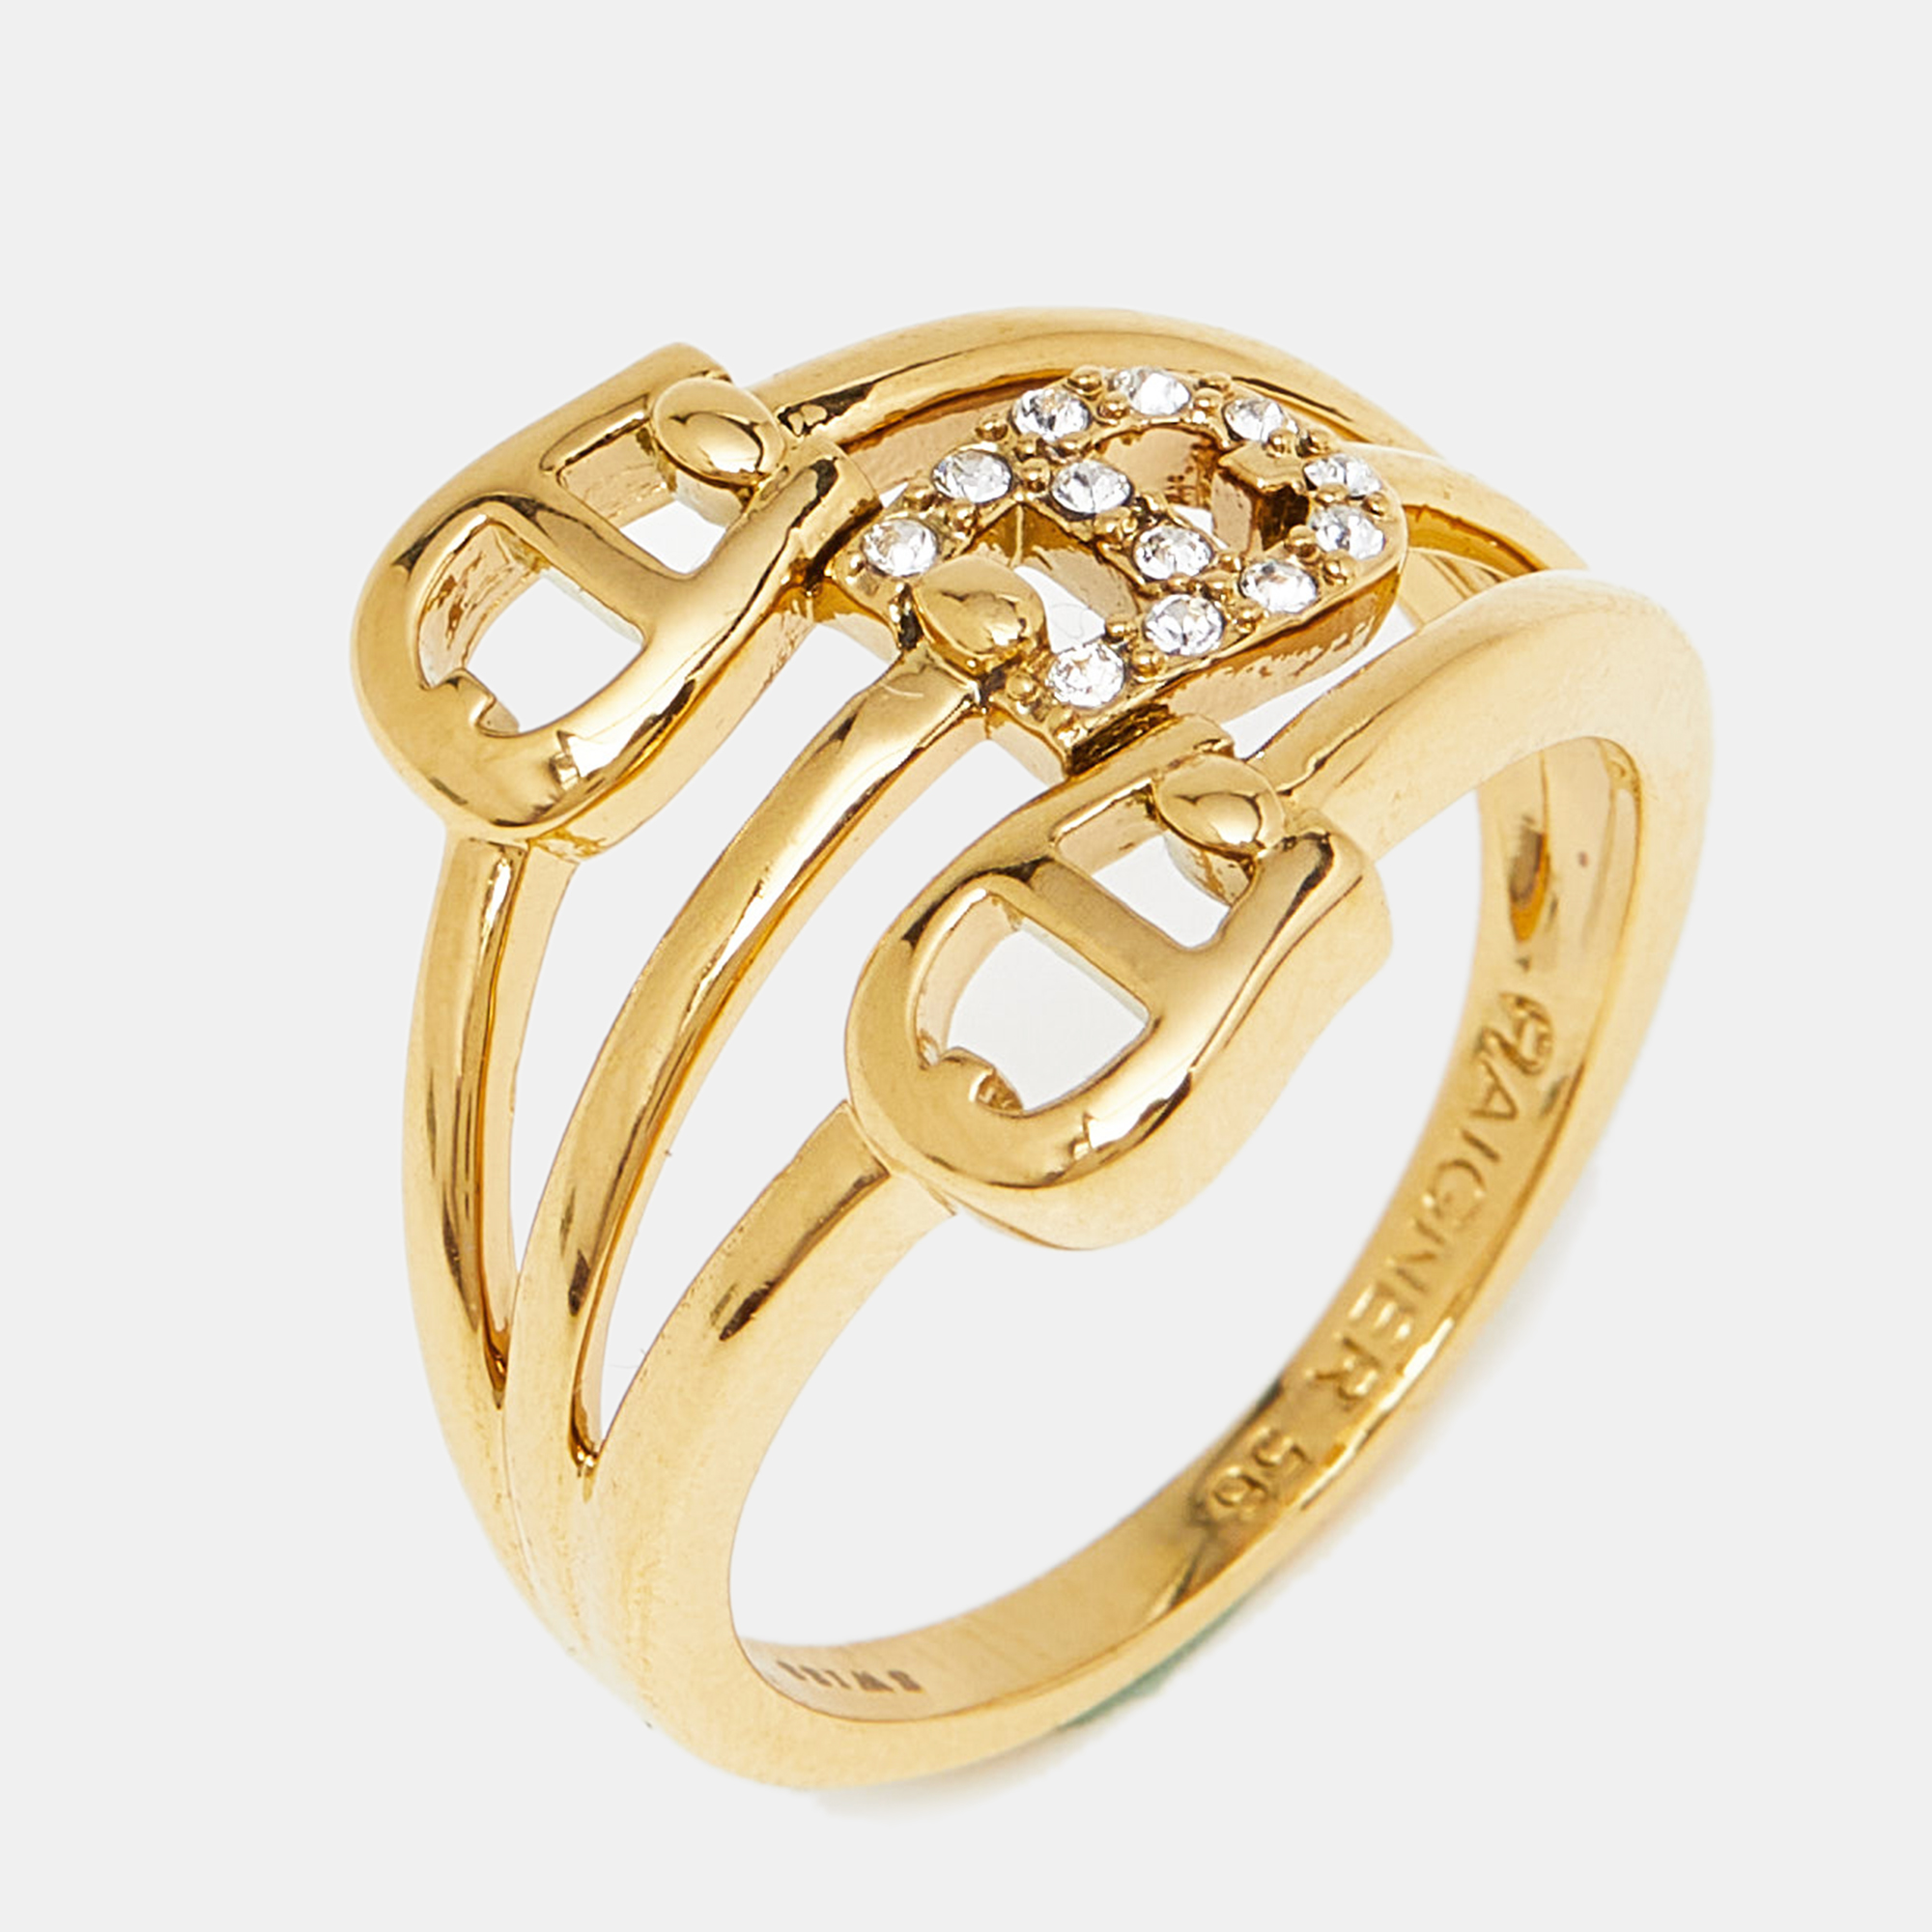 Aigner a logo crystal gold tone ring size 56